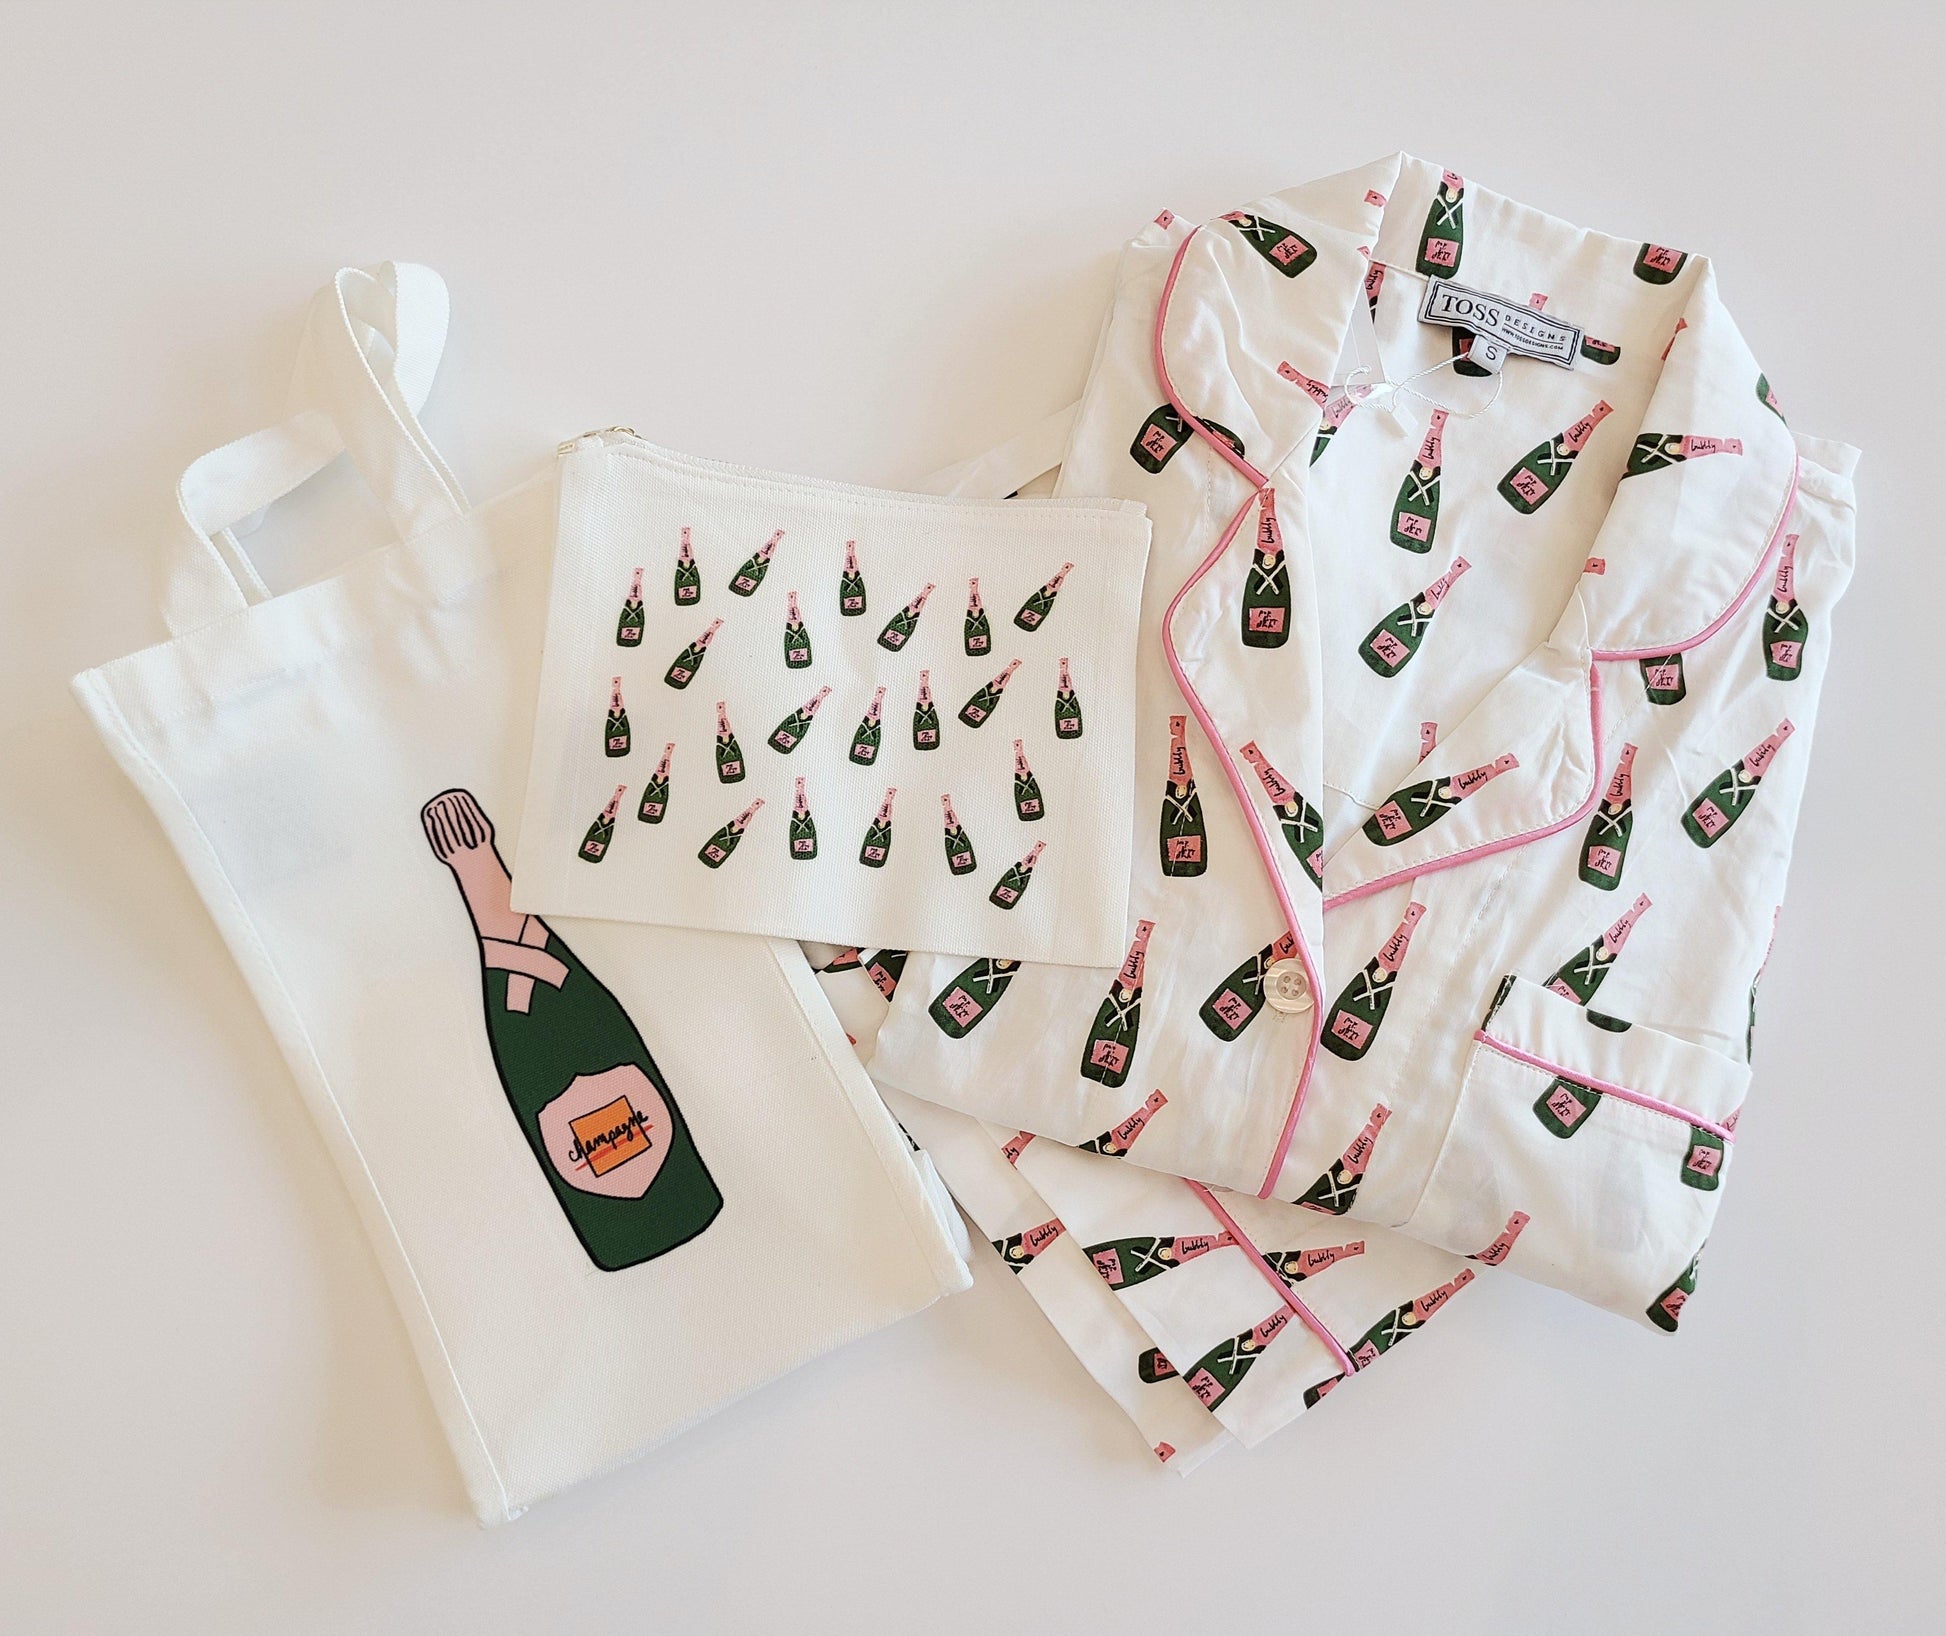 Champagne zip pouch - Sorelle Gifts